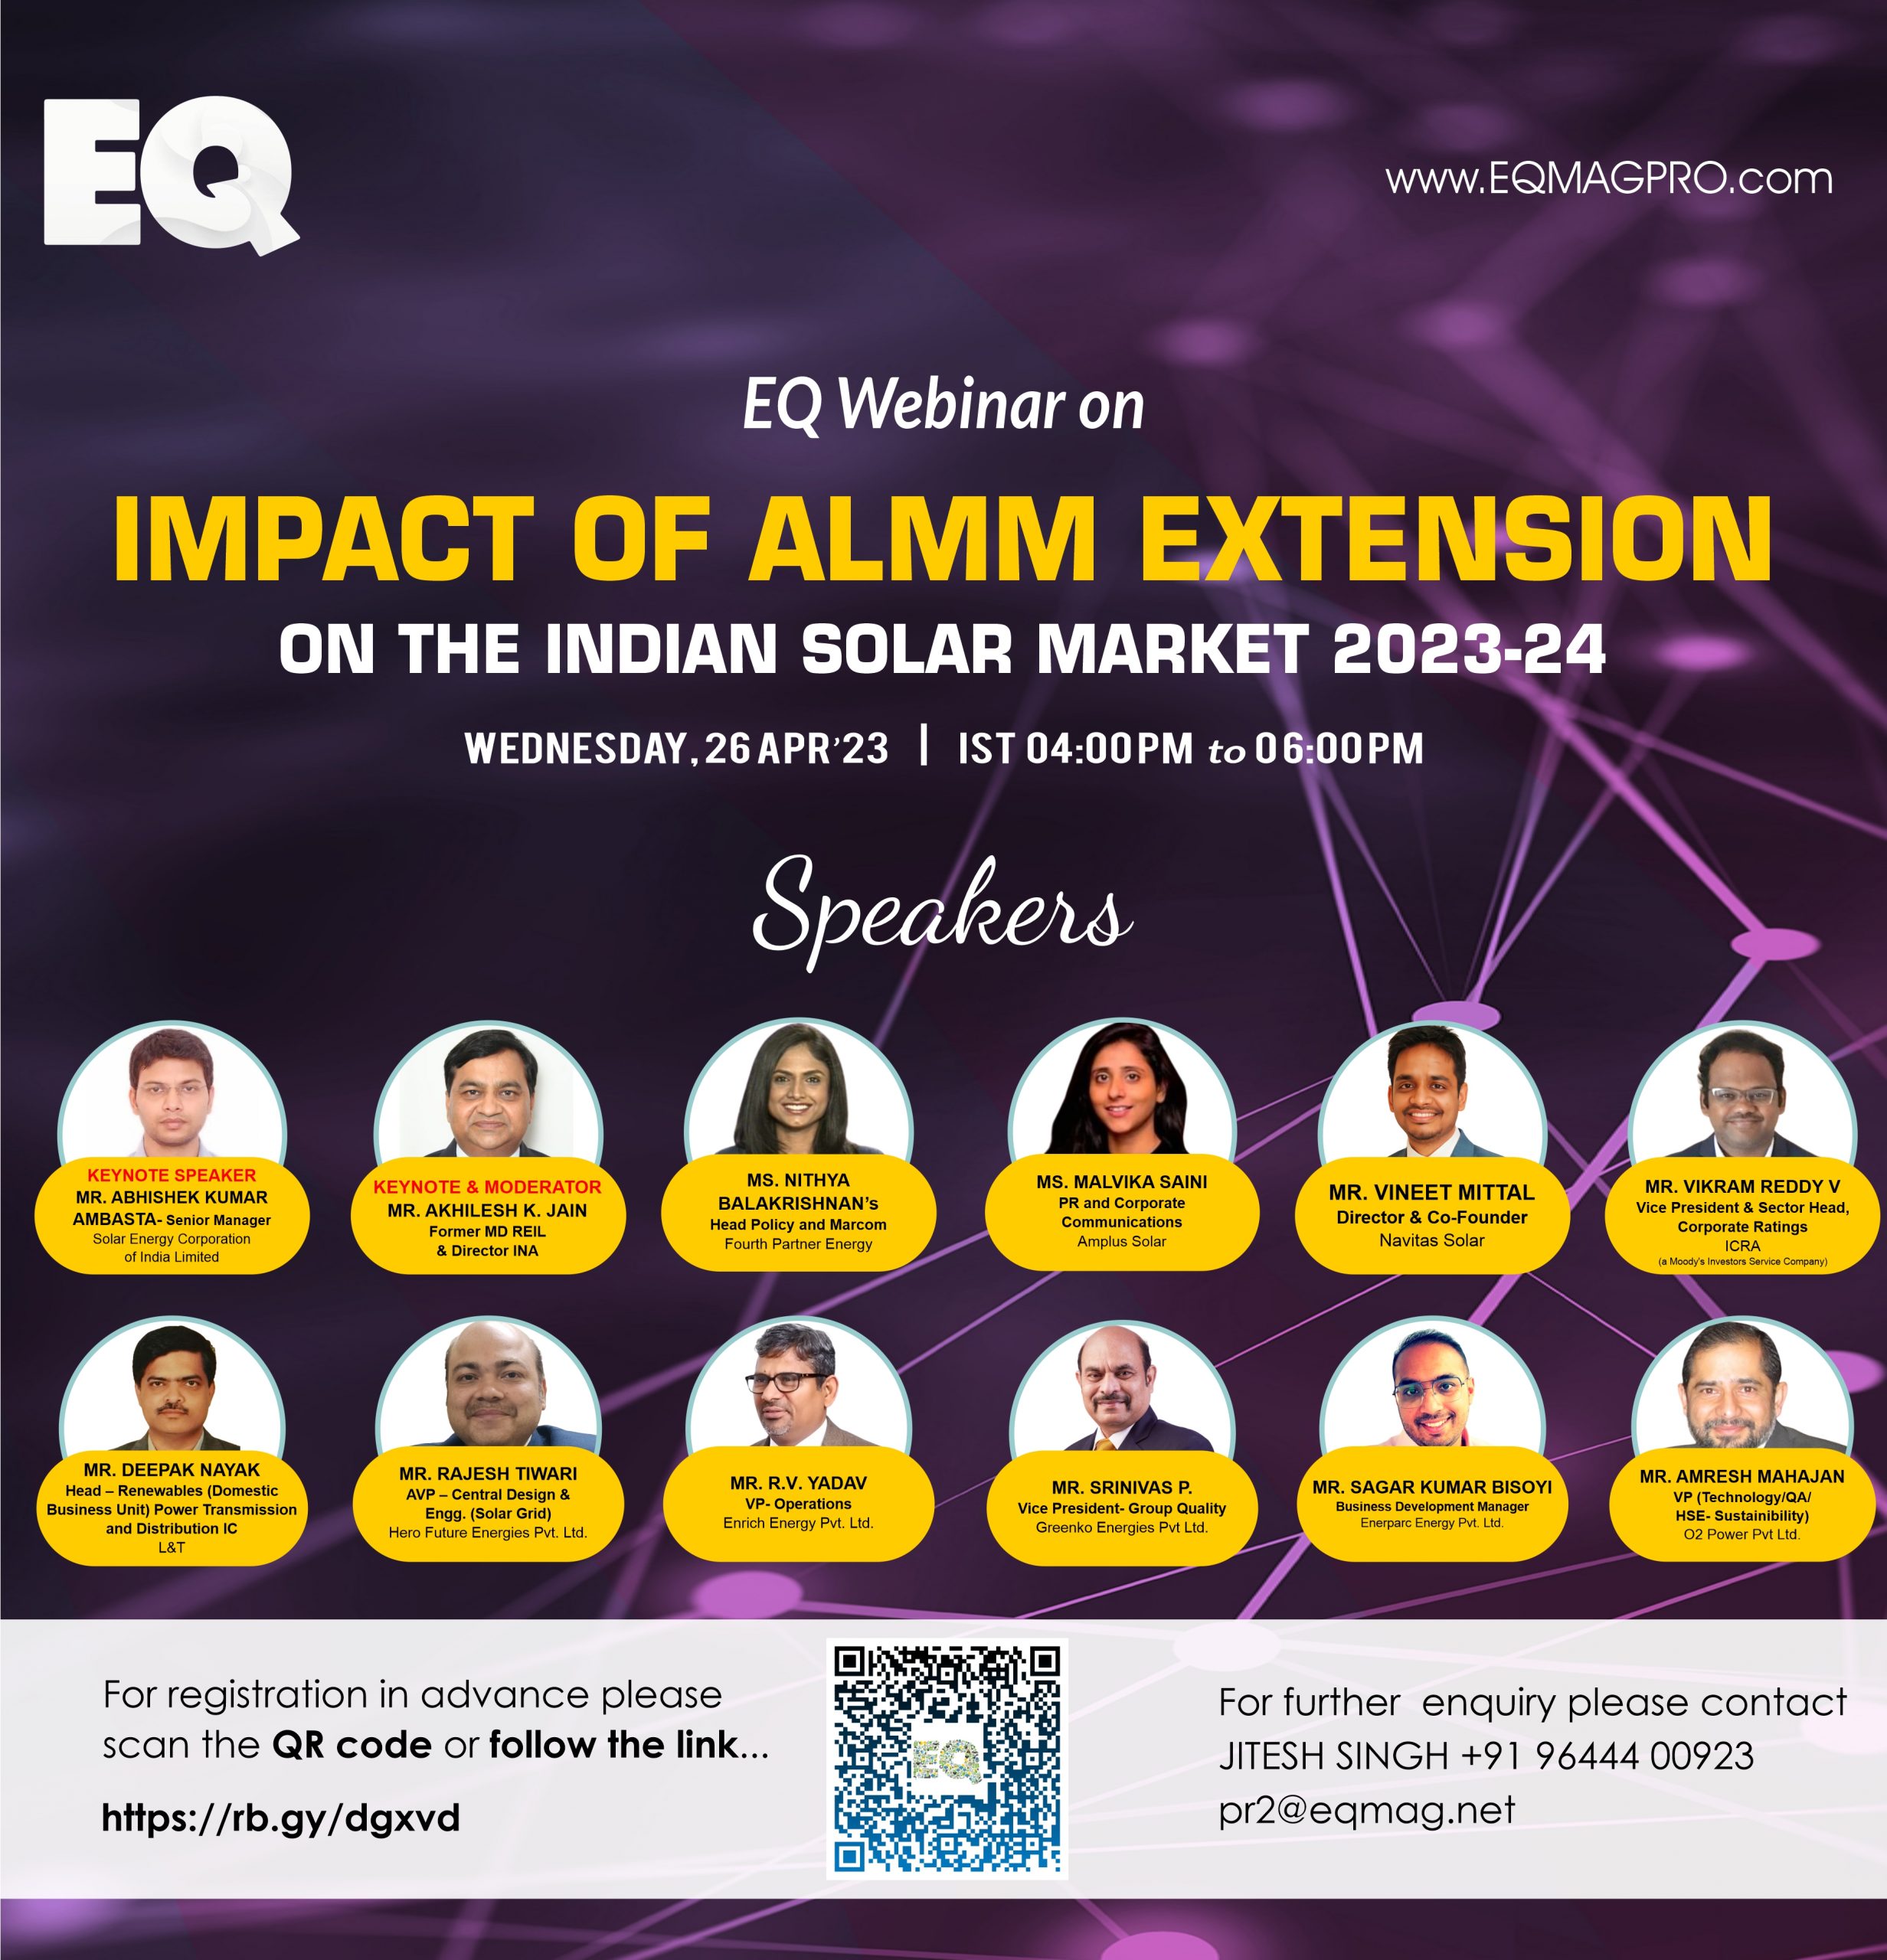 EQ Webinar on Impact of ALMM Extension on Indian Solar Market in 2023-24 is on 26th April 2023 (Wednesday) 4:00 PM Onwards….Register Now!